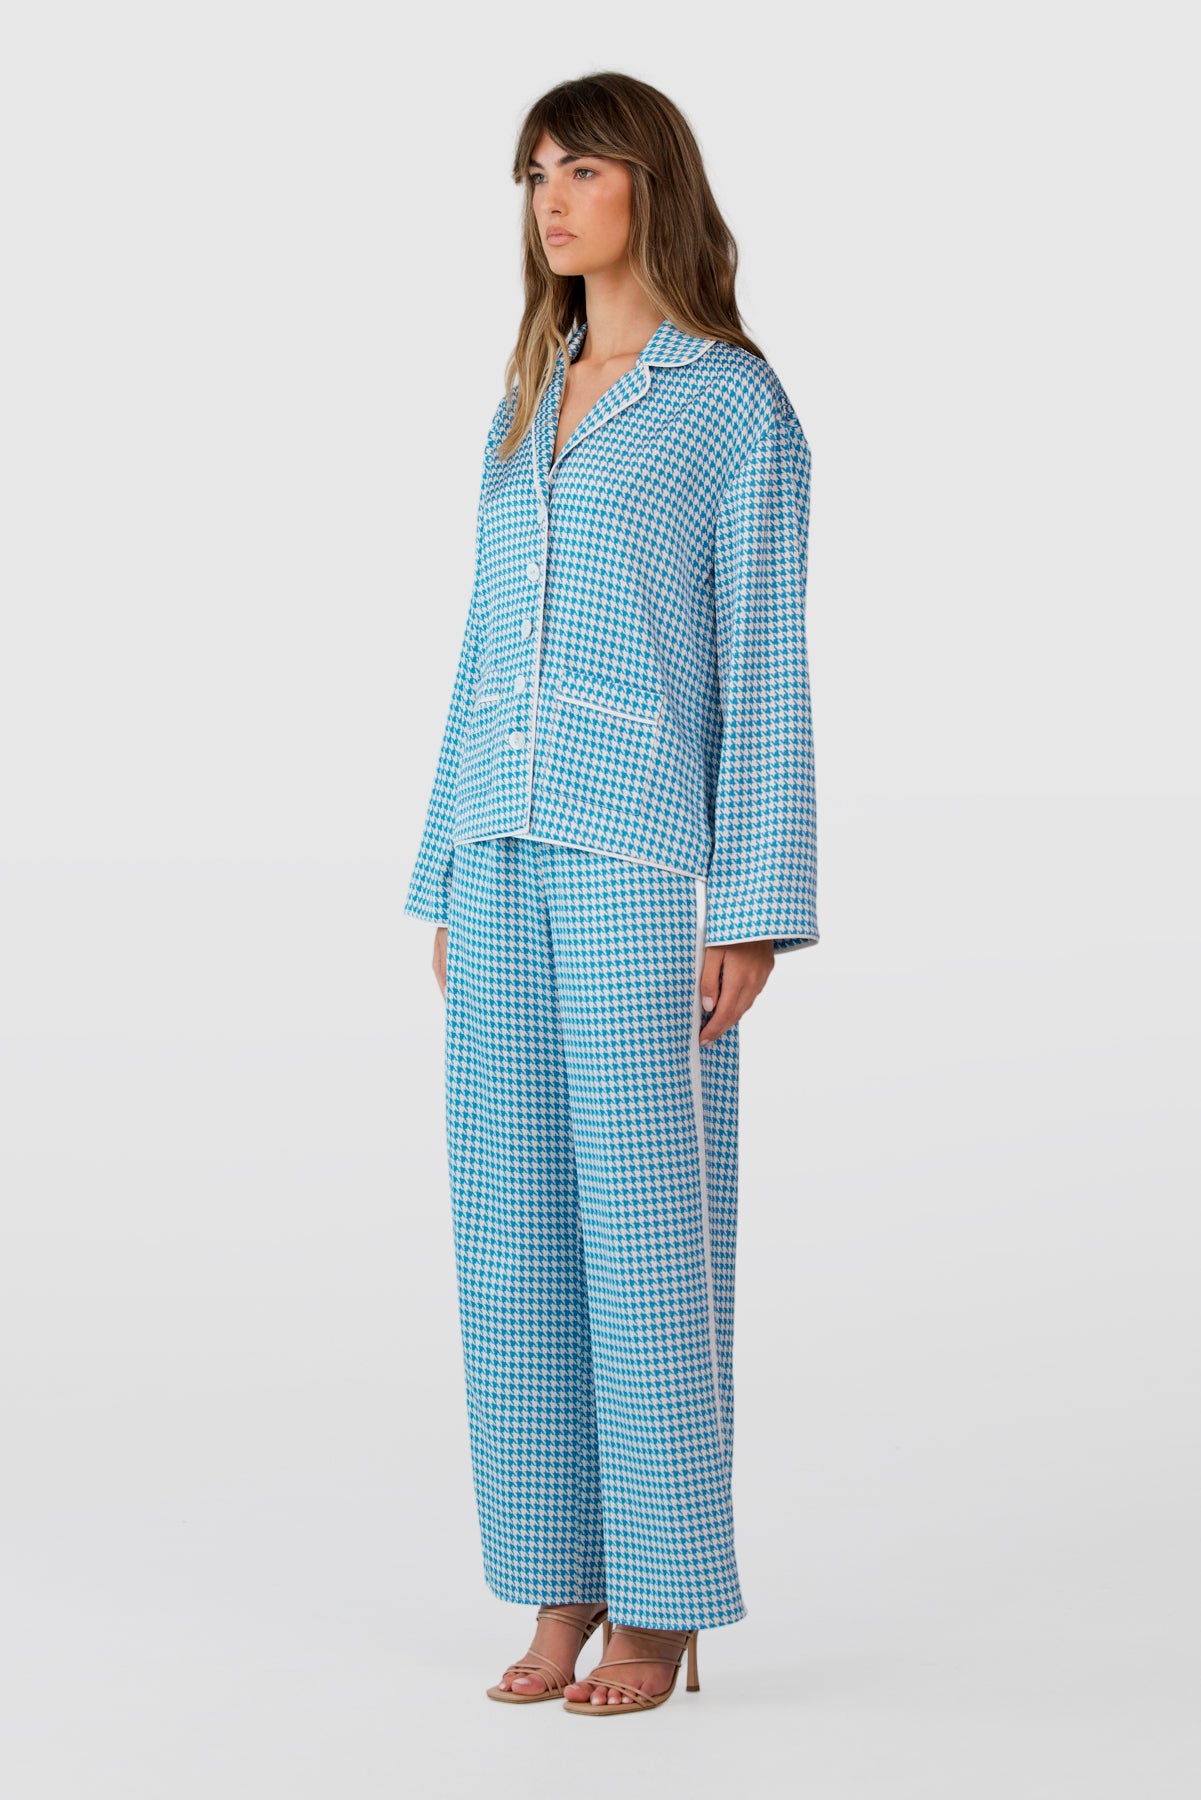 C/MEO Collective - Good For You Shirt - Blue Houndstooth